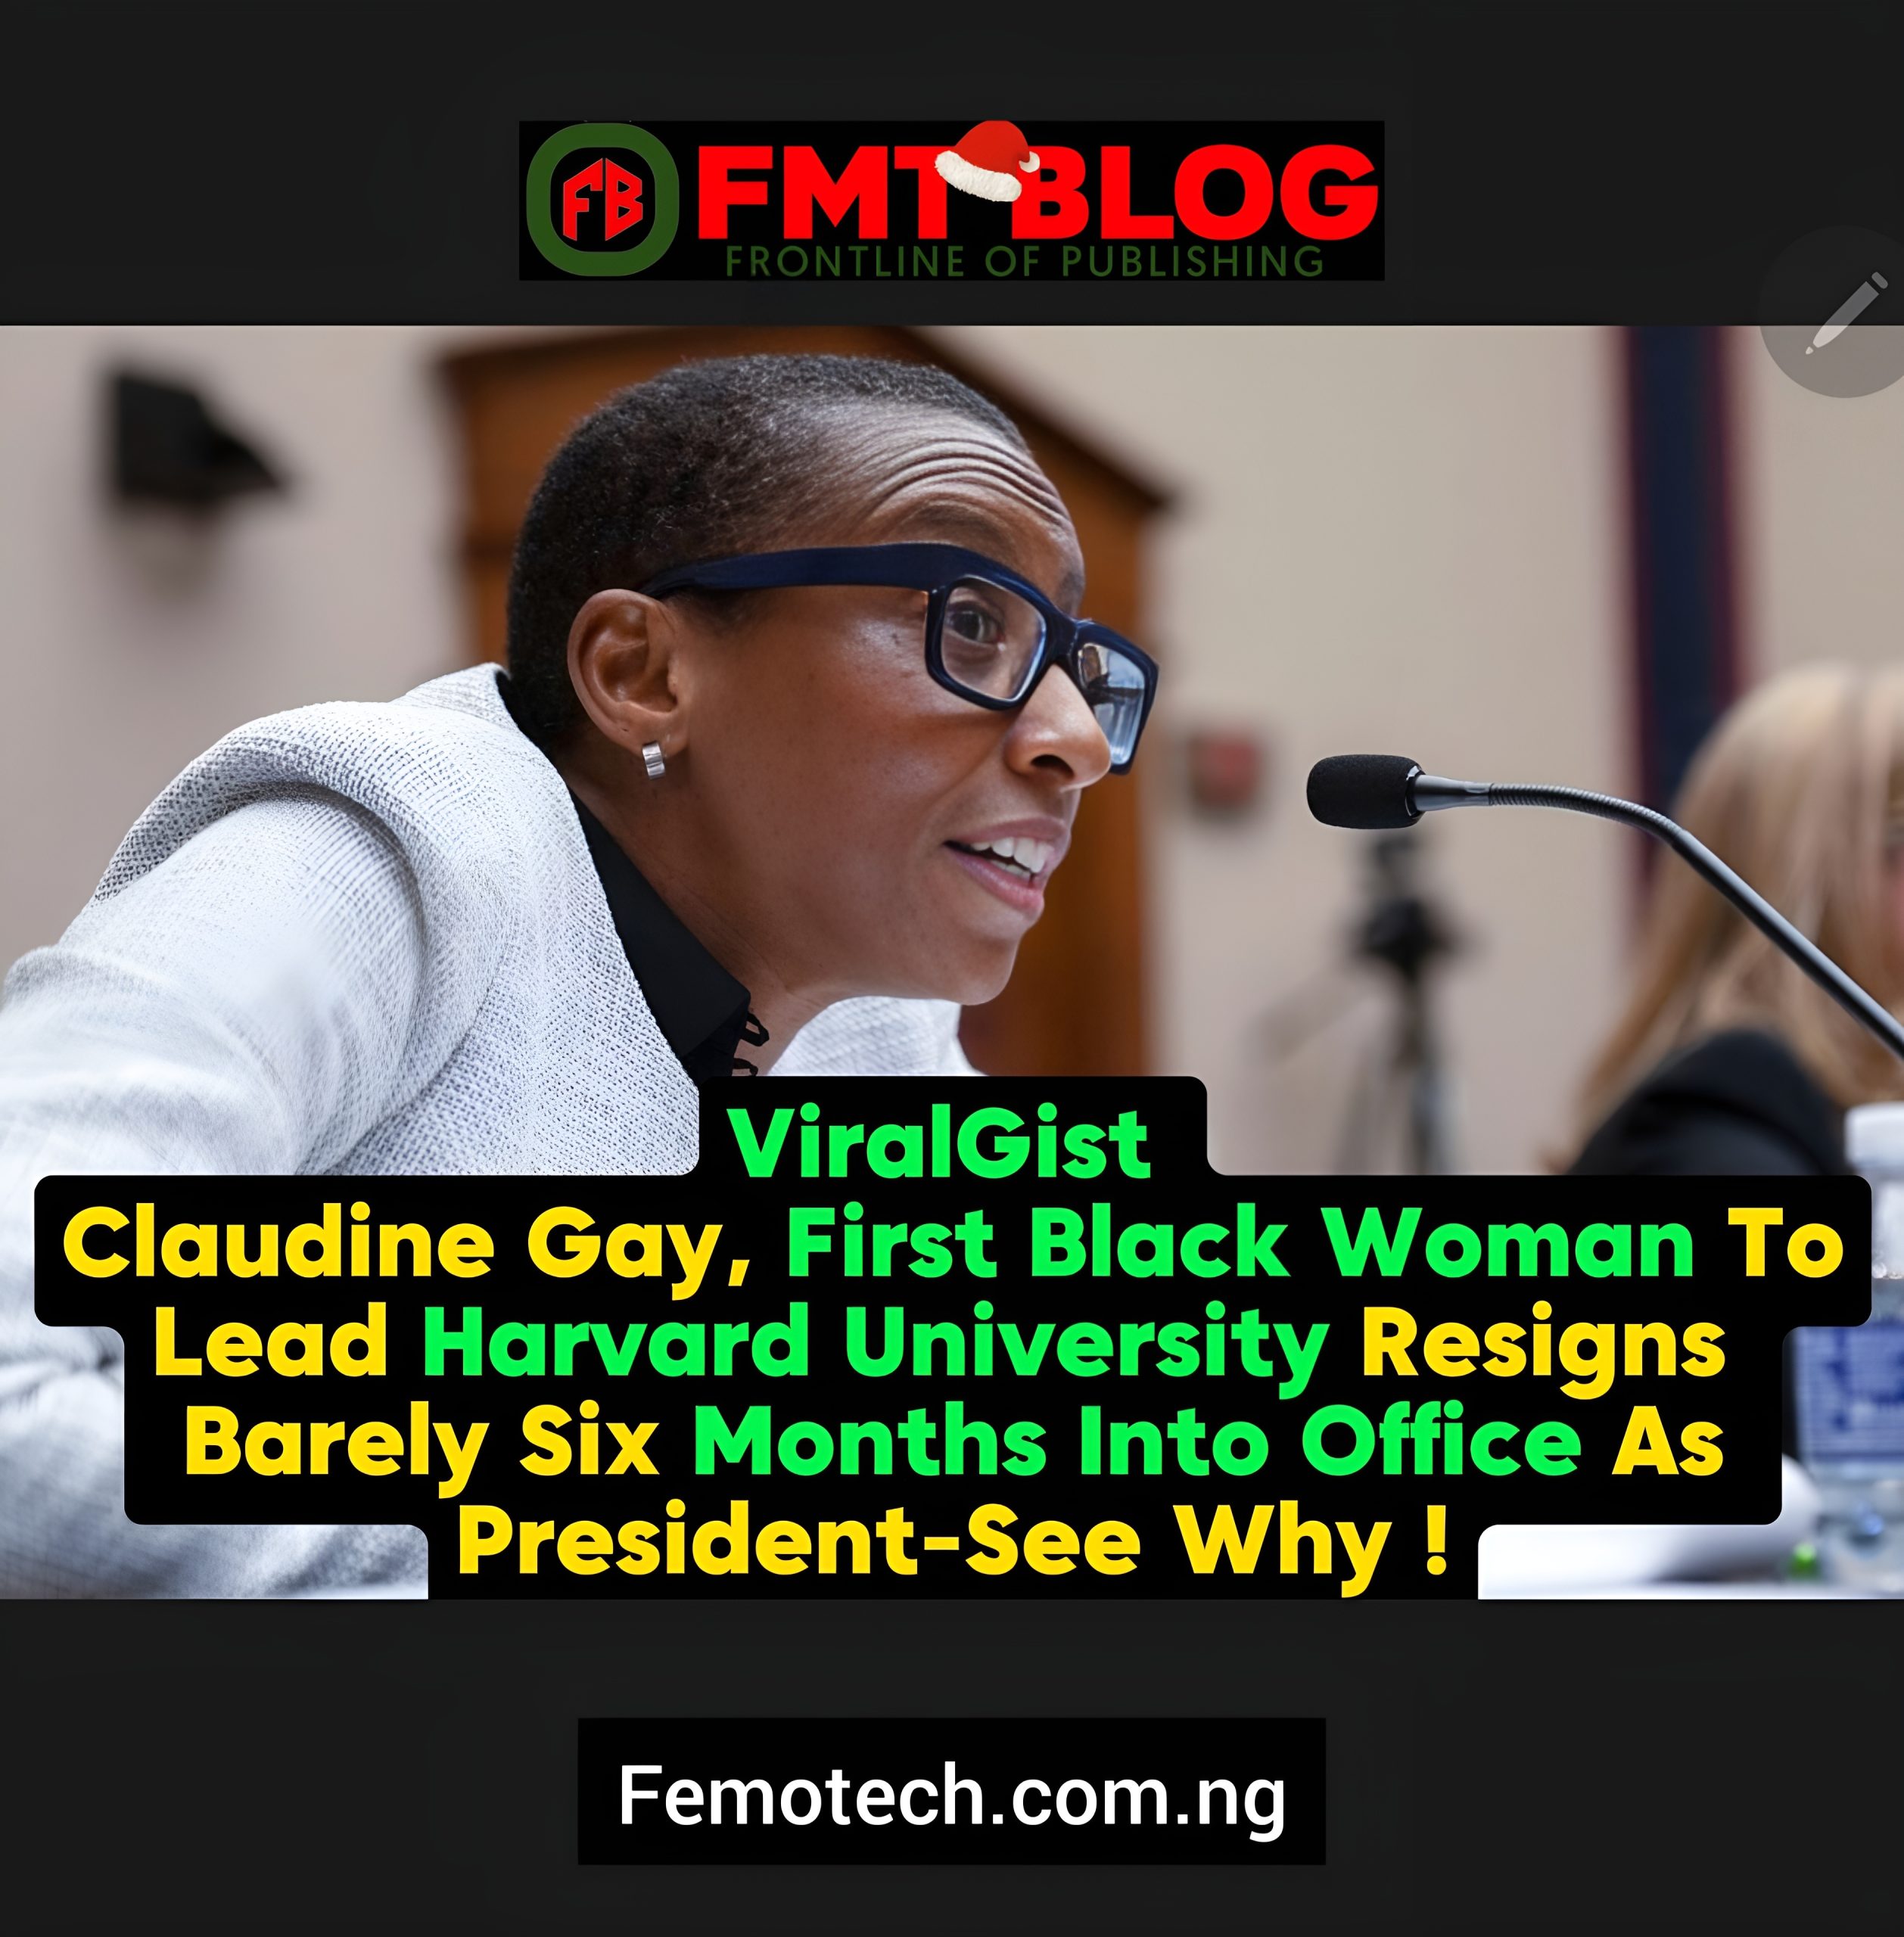 Claudine Gay,  First Black Woman To Lead Harvard University Resigns Barely Six Months Into Office As President -See Why !